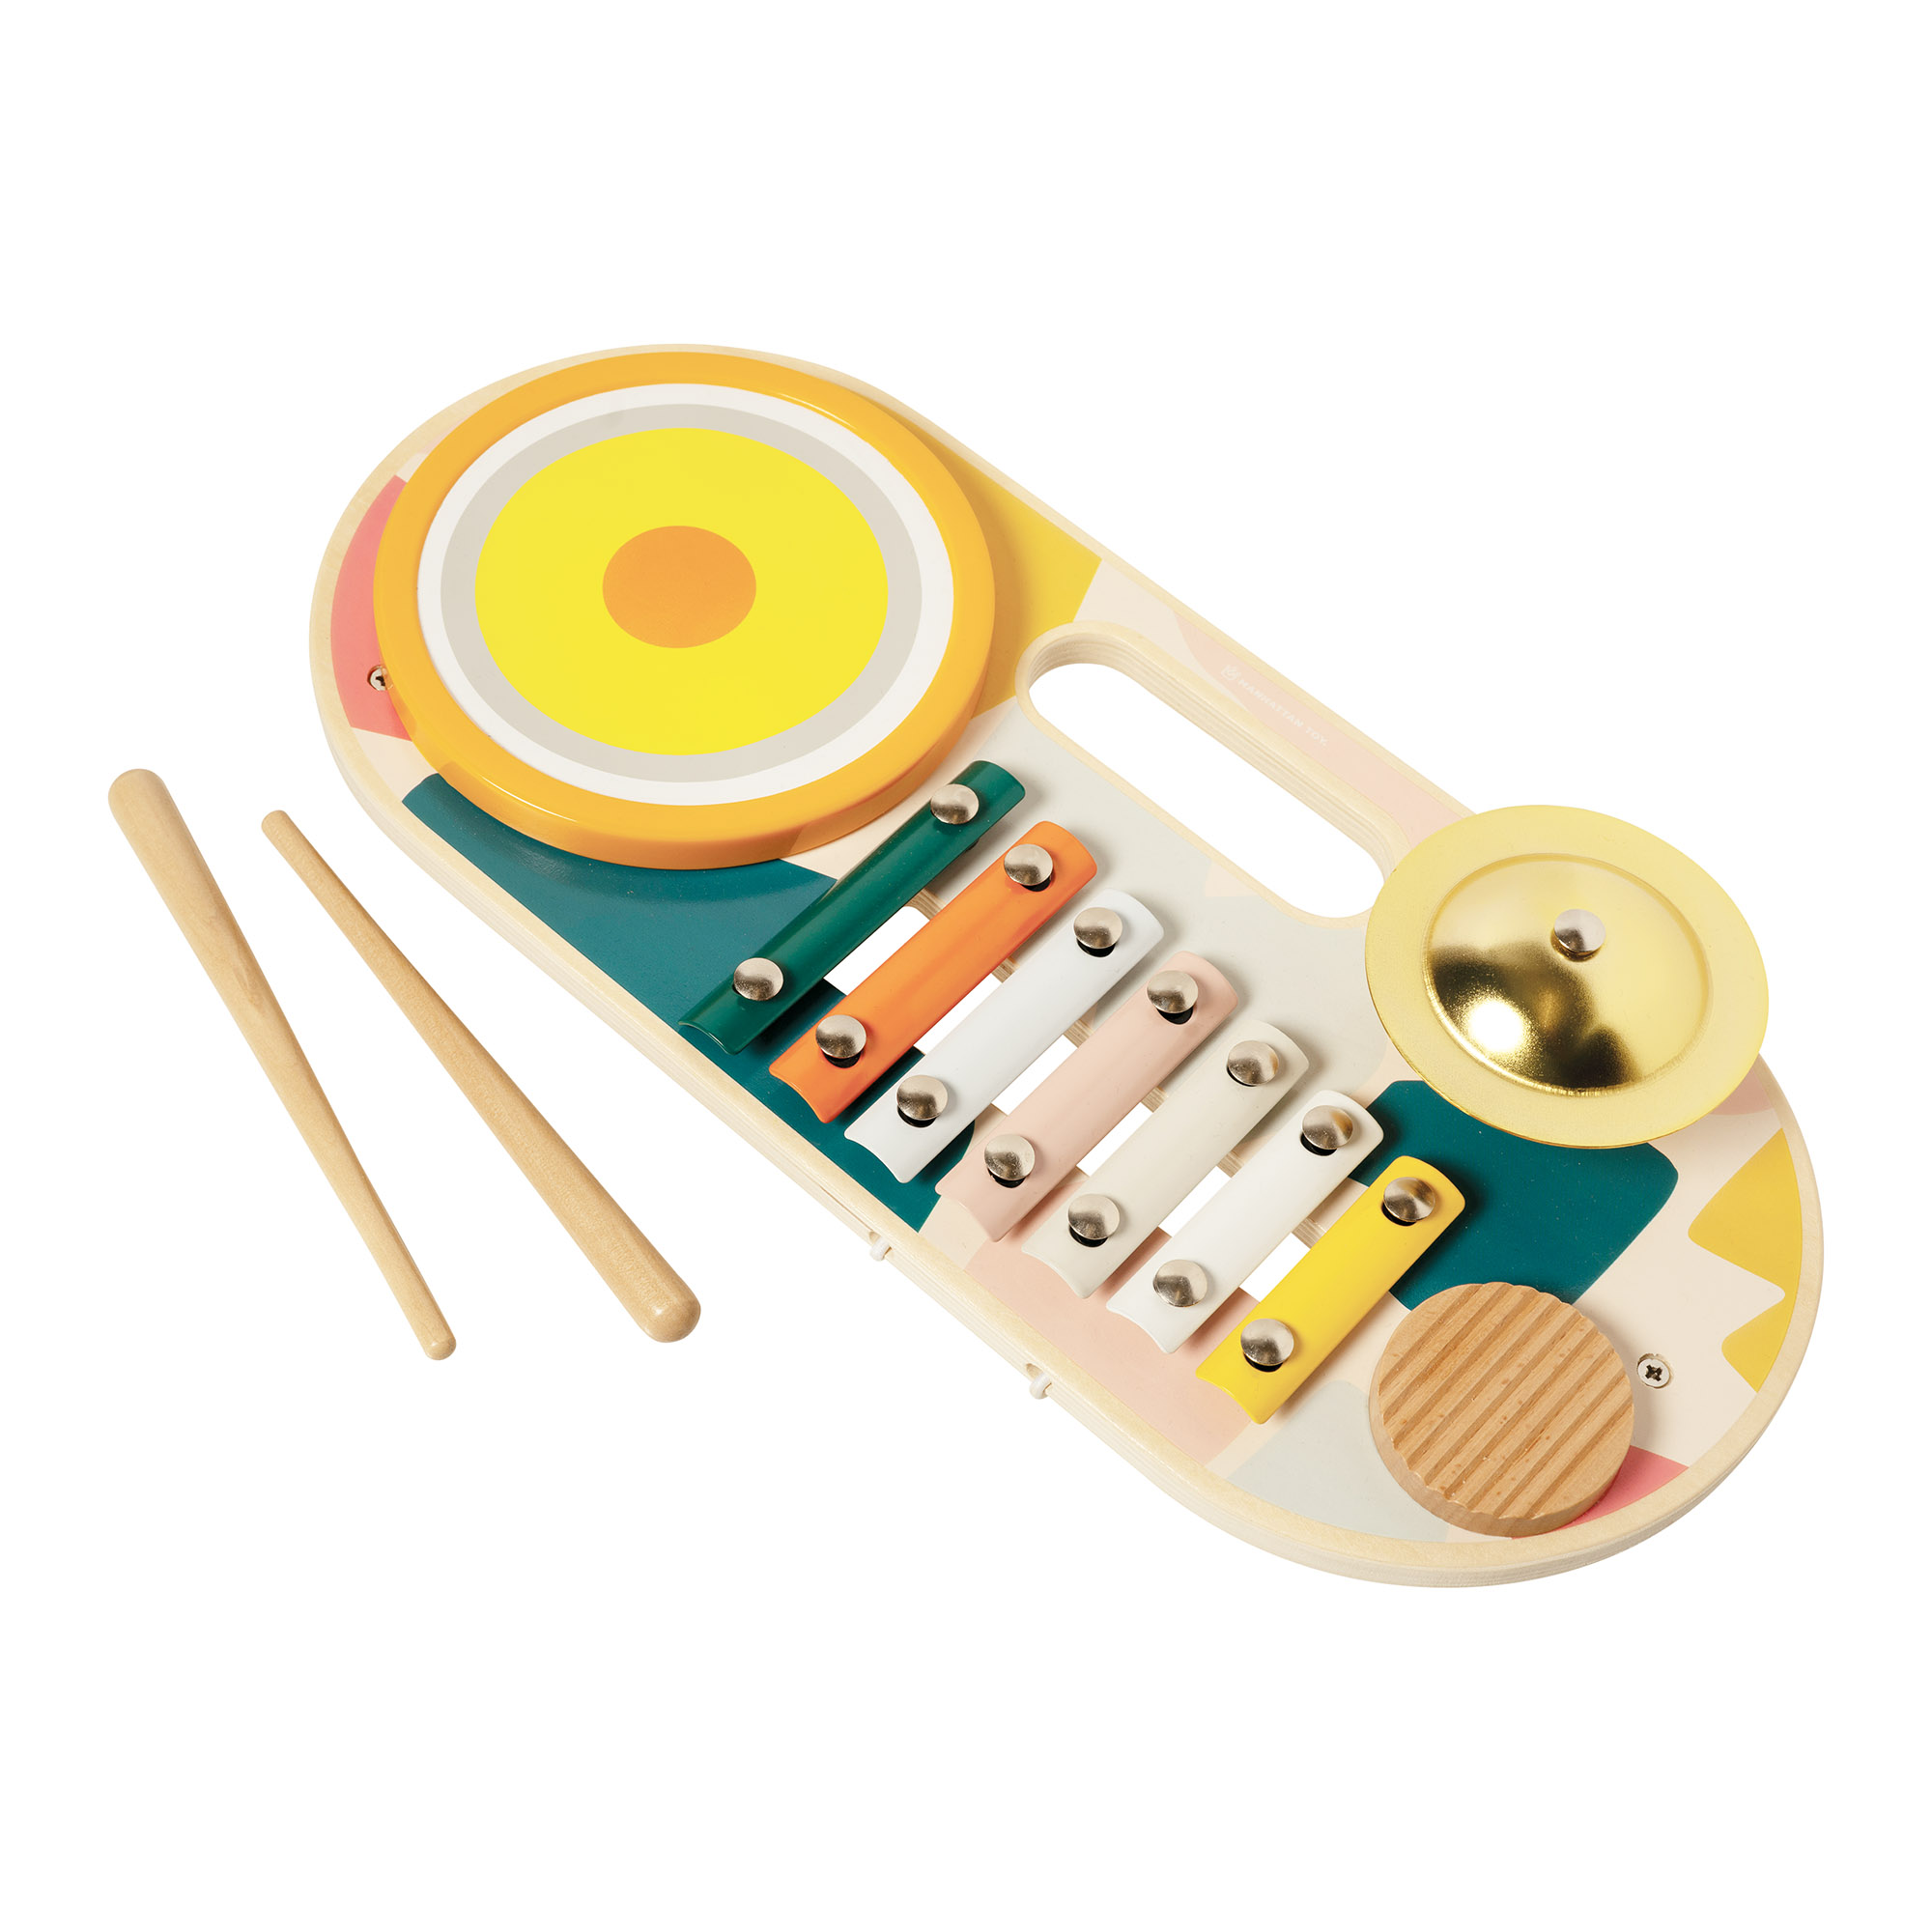 Manhattan Toy Beats to Go Wooden Toddler and Preschool Musical Learning Toy Xylophone, Drum, Cymbal and Washboard - image 5 of 8